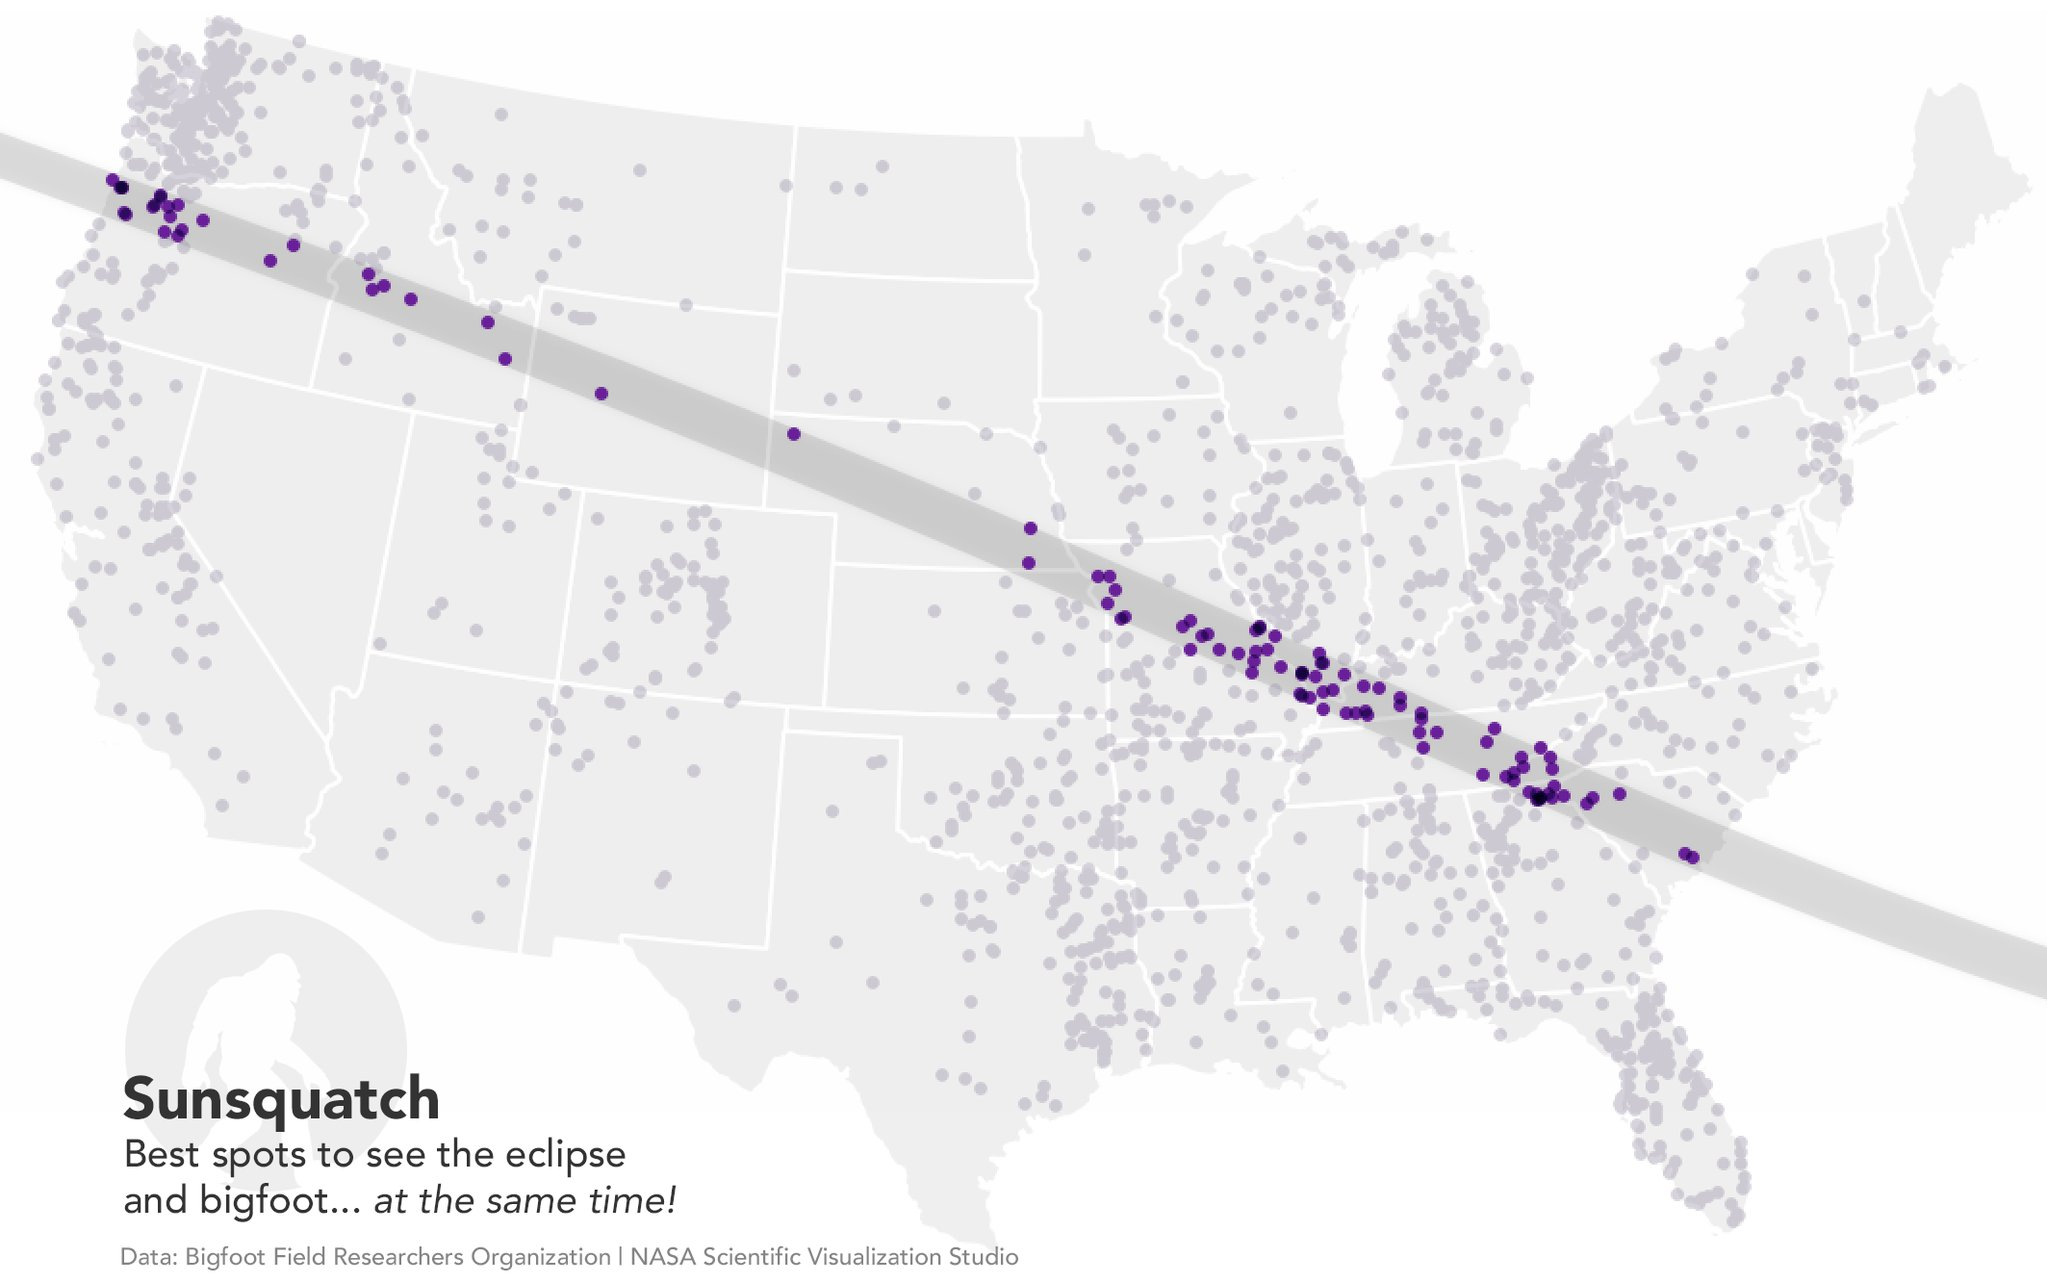 example of a map that represents relationships in spatial data (in this case, places where one can view both bigfoot and a solar eclipse)